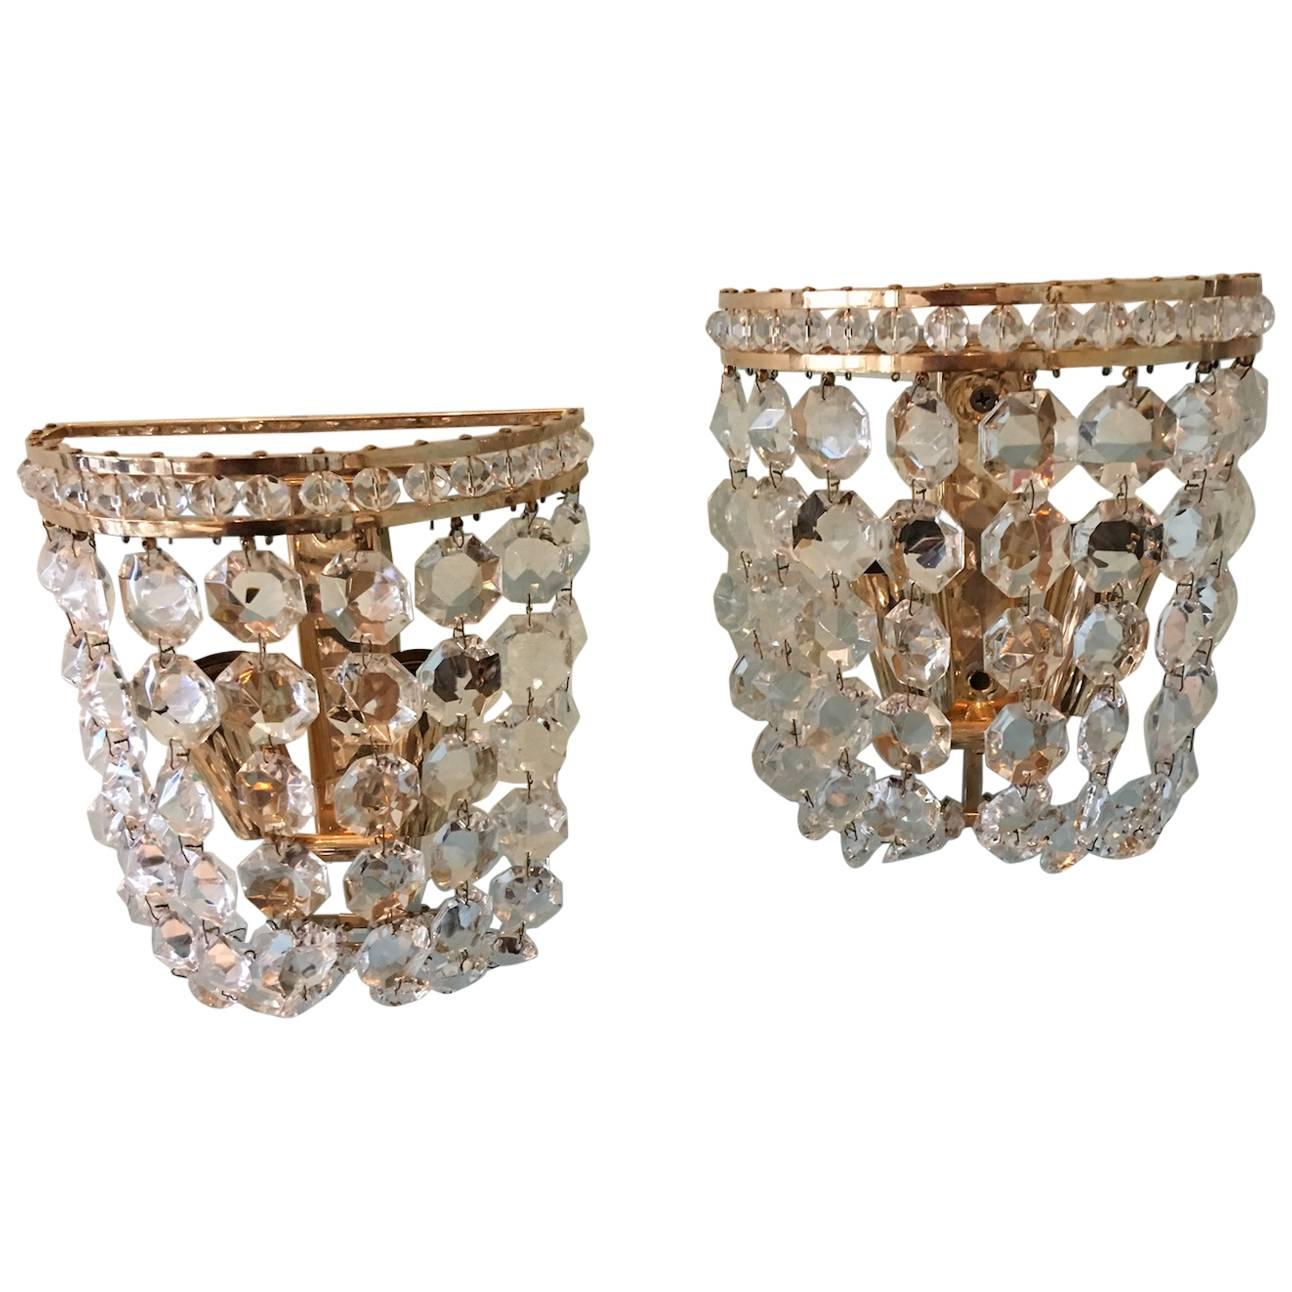 Pair of Sconces with Crystal Elements